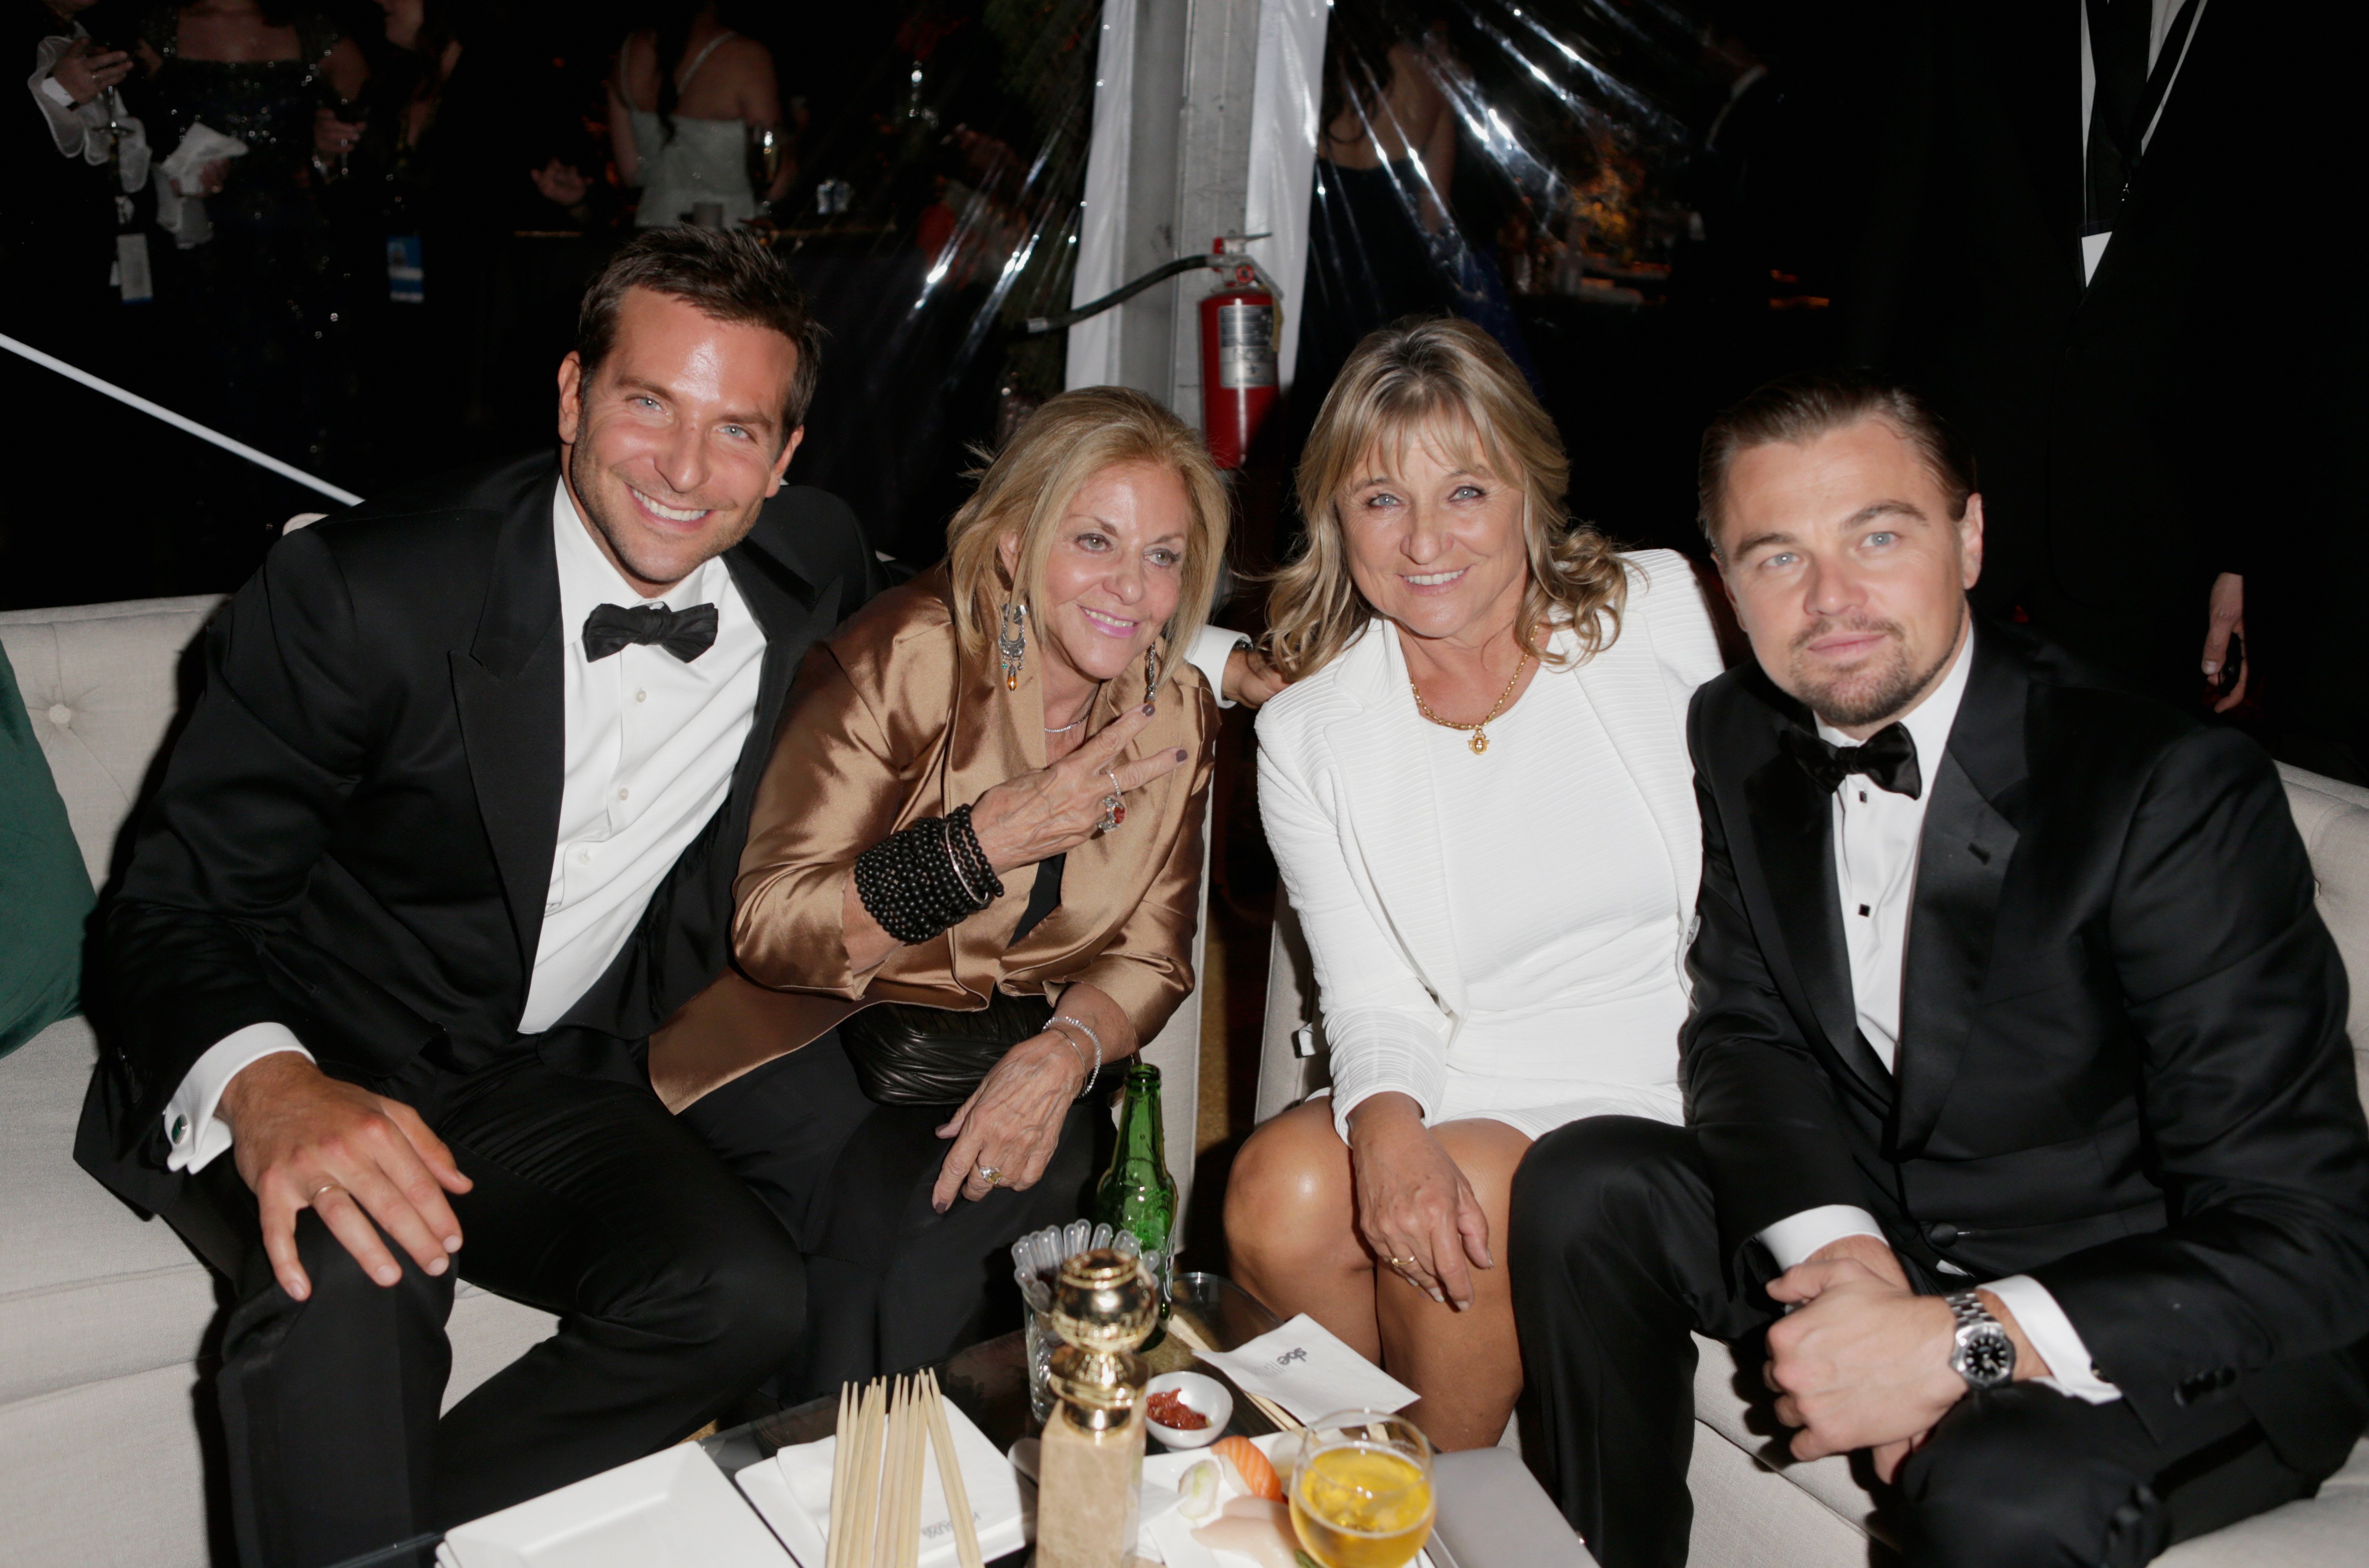 Actor Bradley Cooper, mother Gloria Campano, Actor Leonardo DiCaprio, and mother Irmelin Indenbirken attend The Weinstein Company & Netflix's 2014 Golden Globes After Party at The Beverly Hilton Hotel on January 12, 2014 in Beverly Hills, California. | Source: Getty Images 